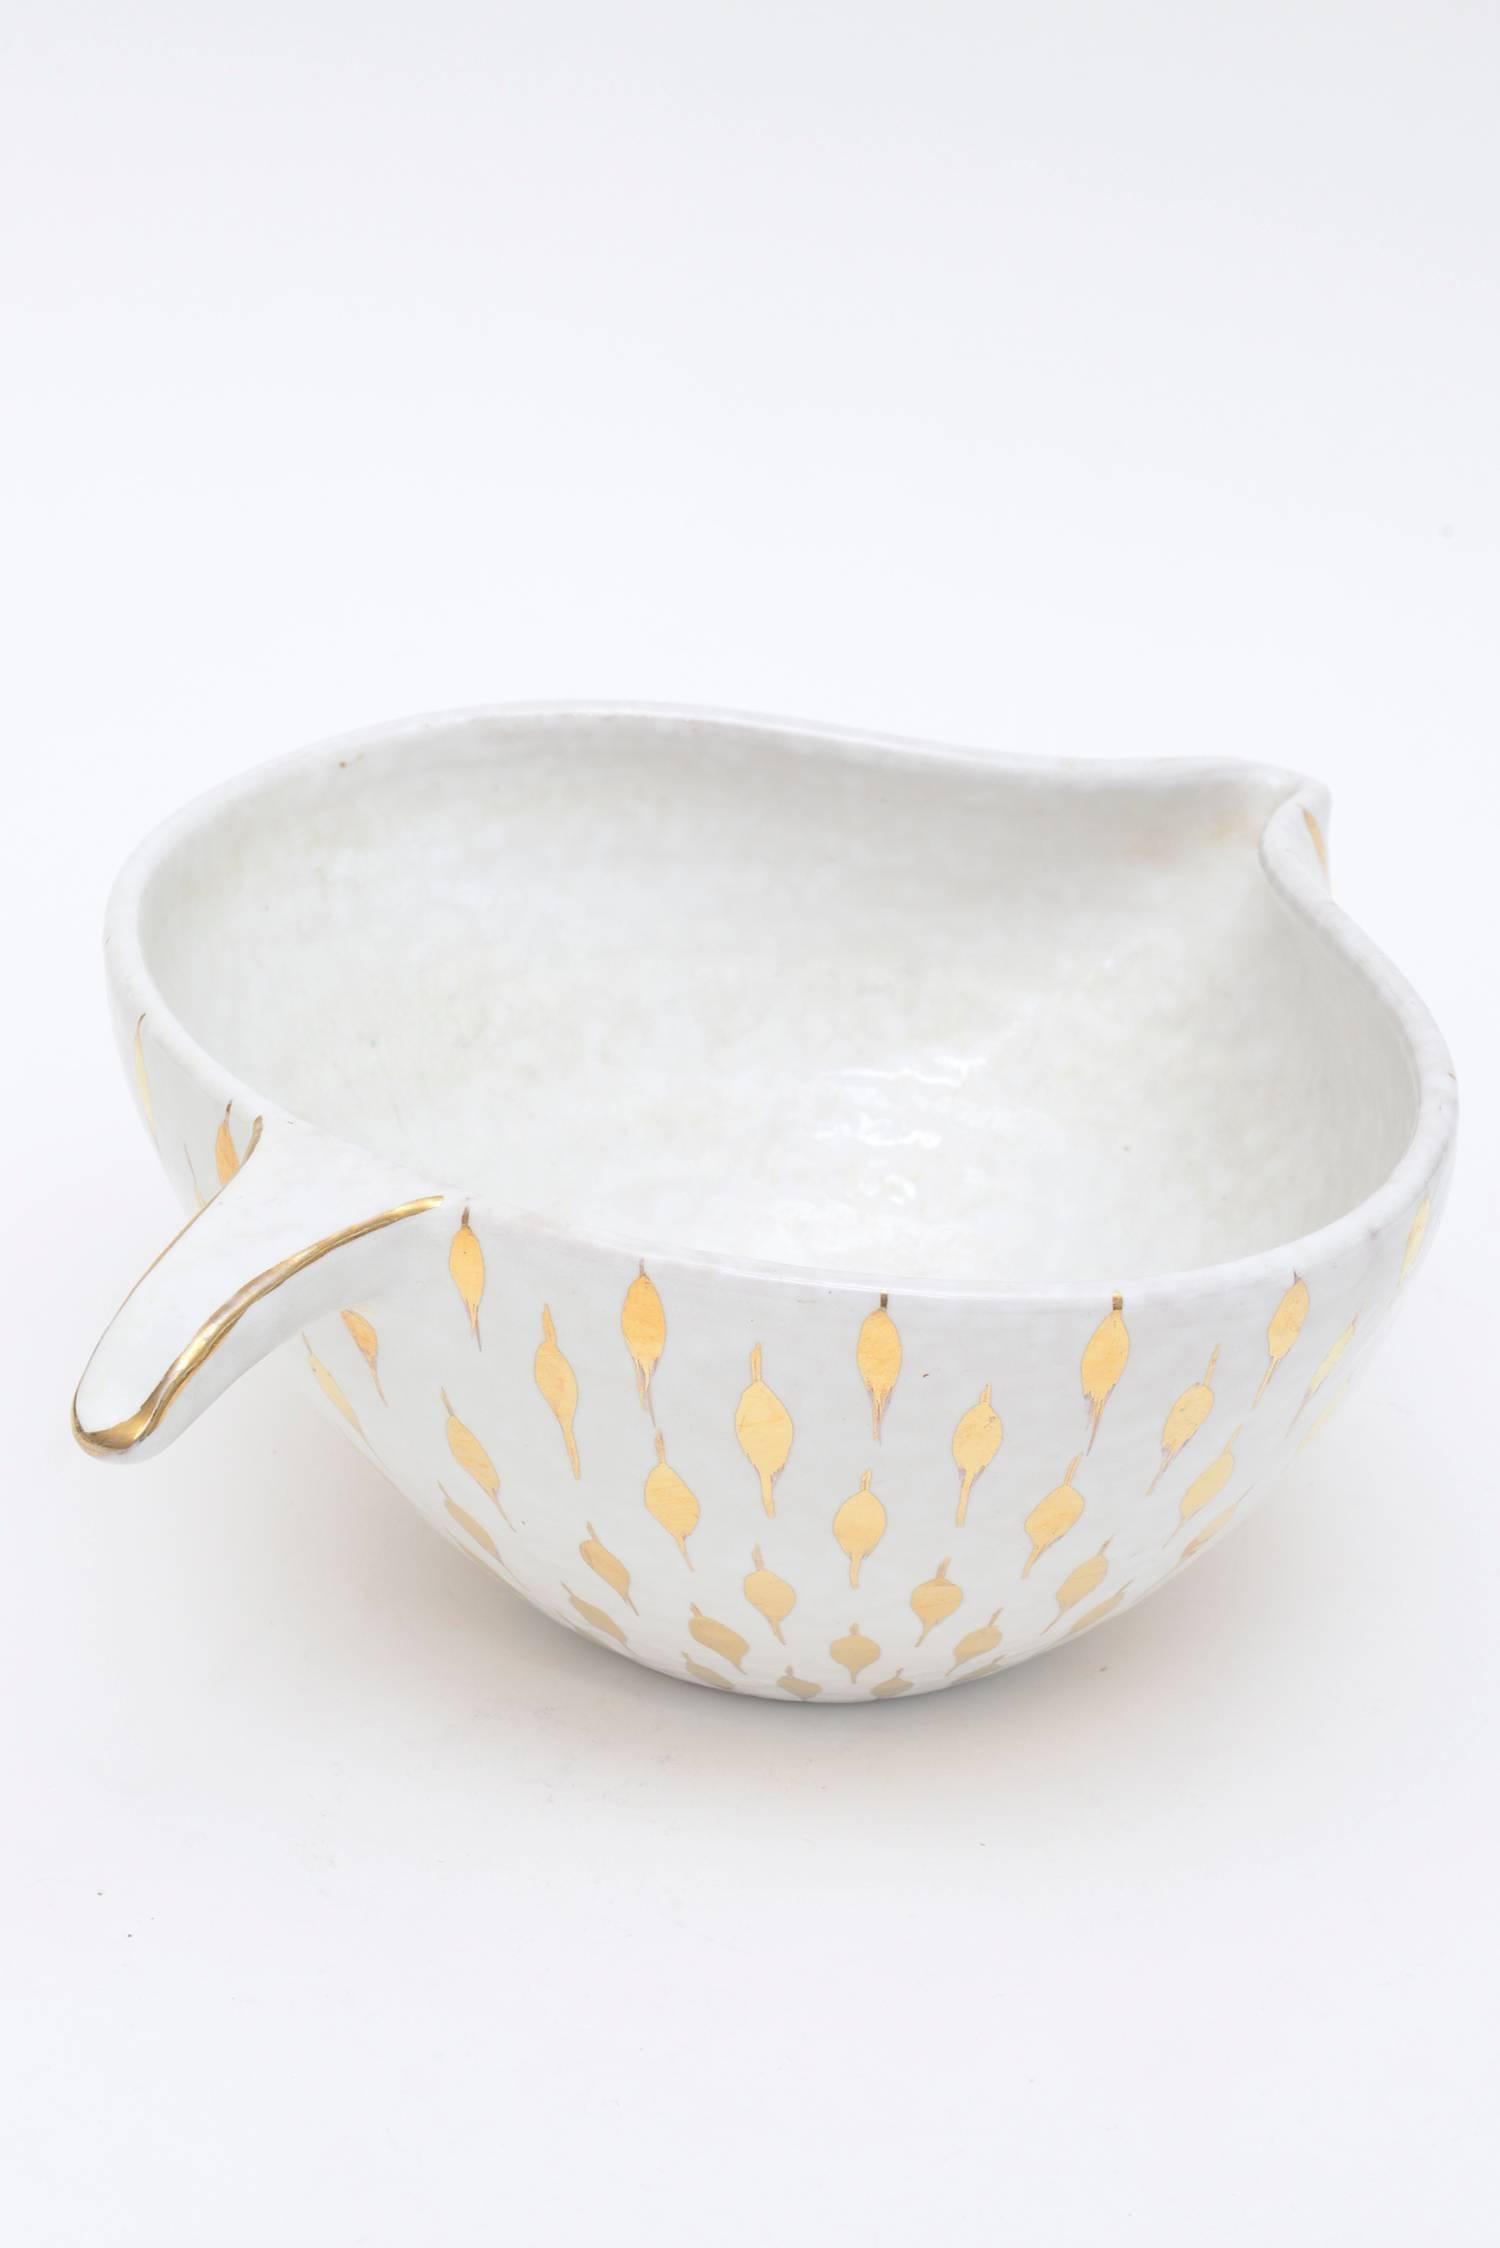 This sculptural vintage Italian Aldo Londi for Bitossi ceramic bowl or vessel has gold painted teardrop like surround shapes on the exterior over white ceramic with a short sculptural handle. It is called the feather plume. The shape is organic with